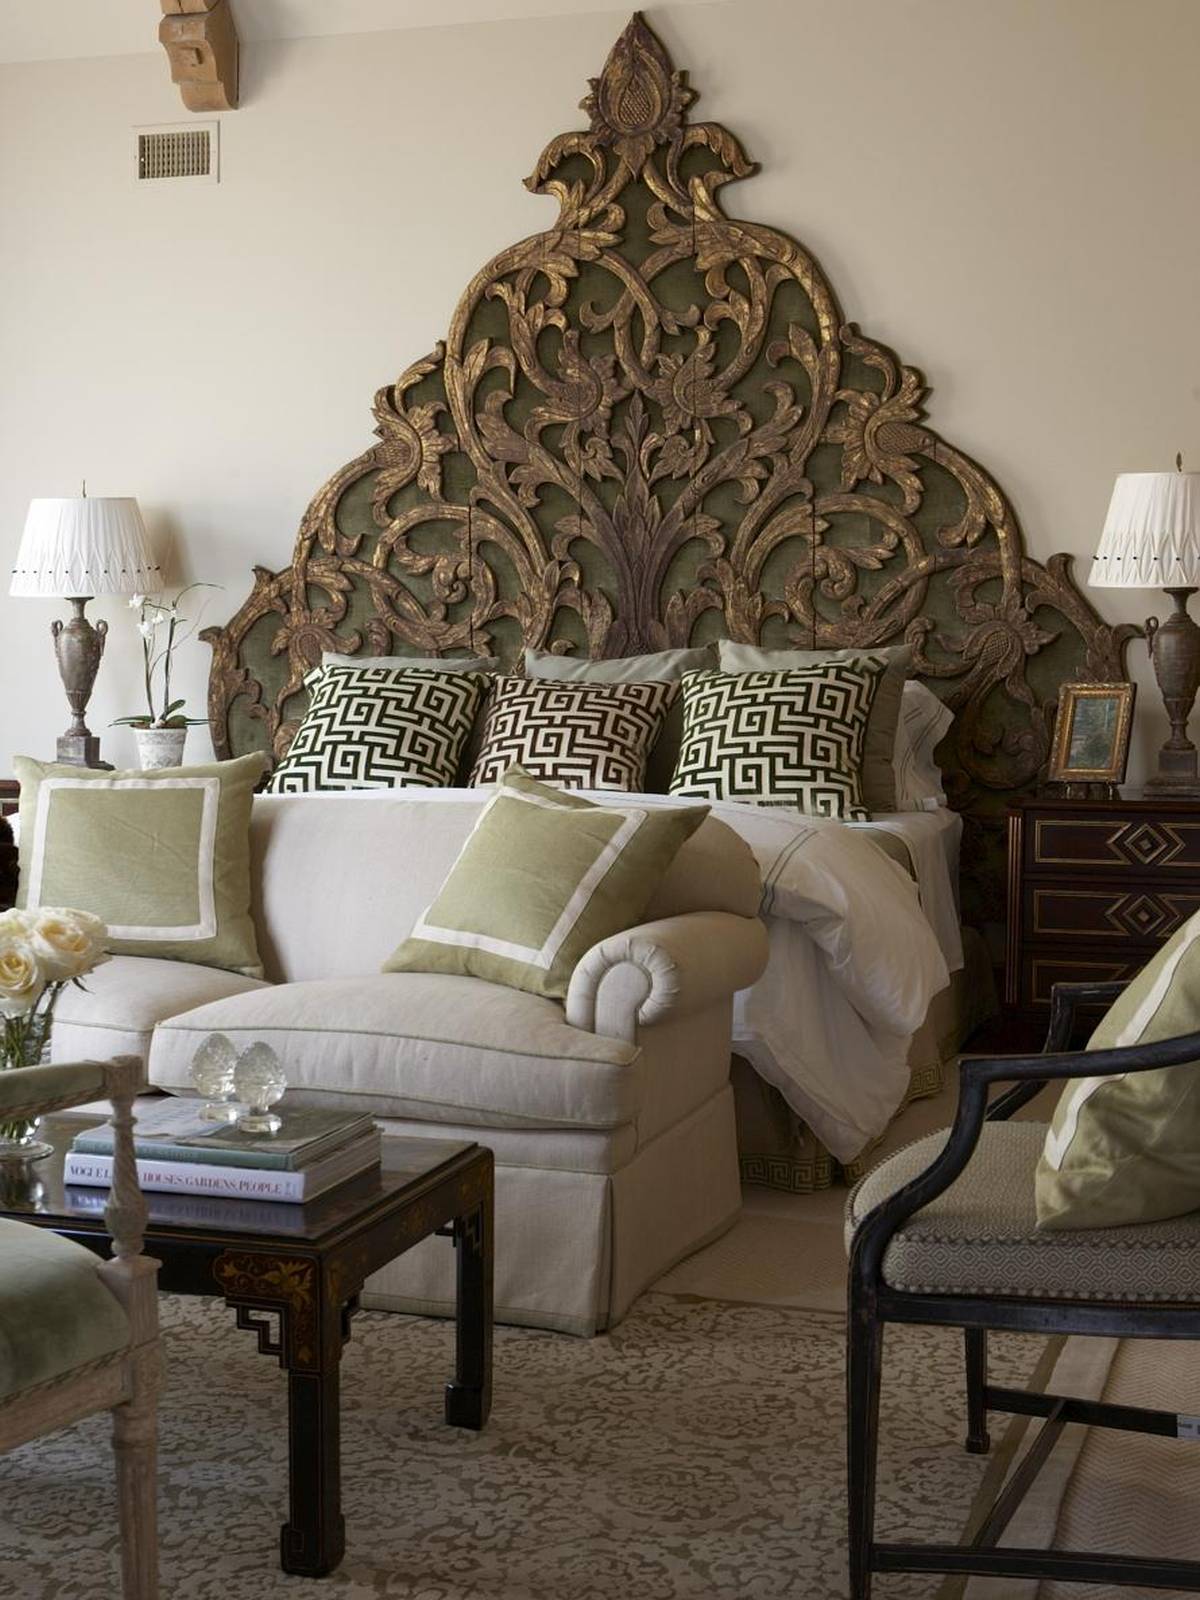 12 Unique Bedrooms With Carved Headboards